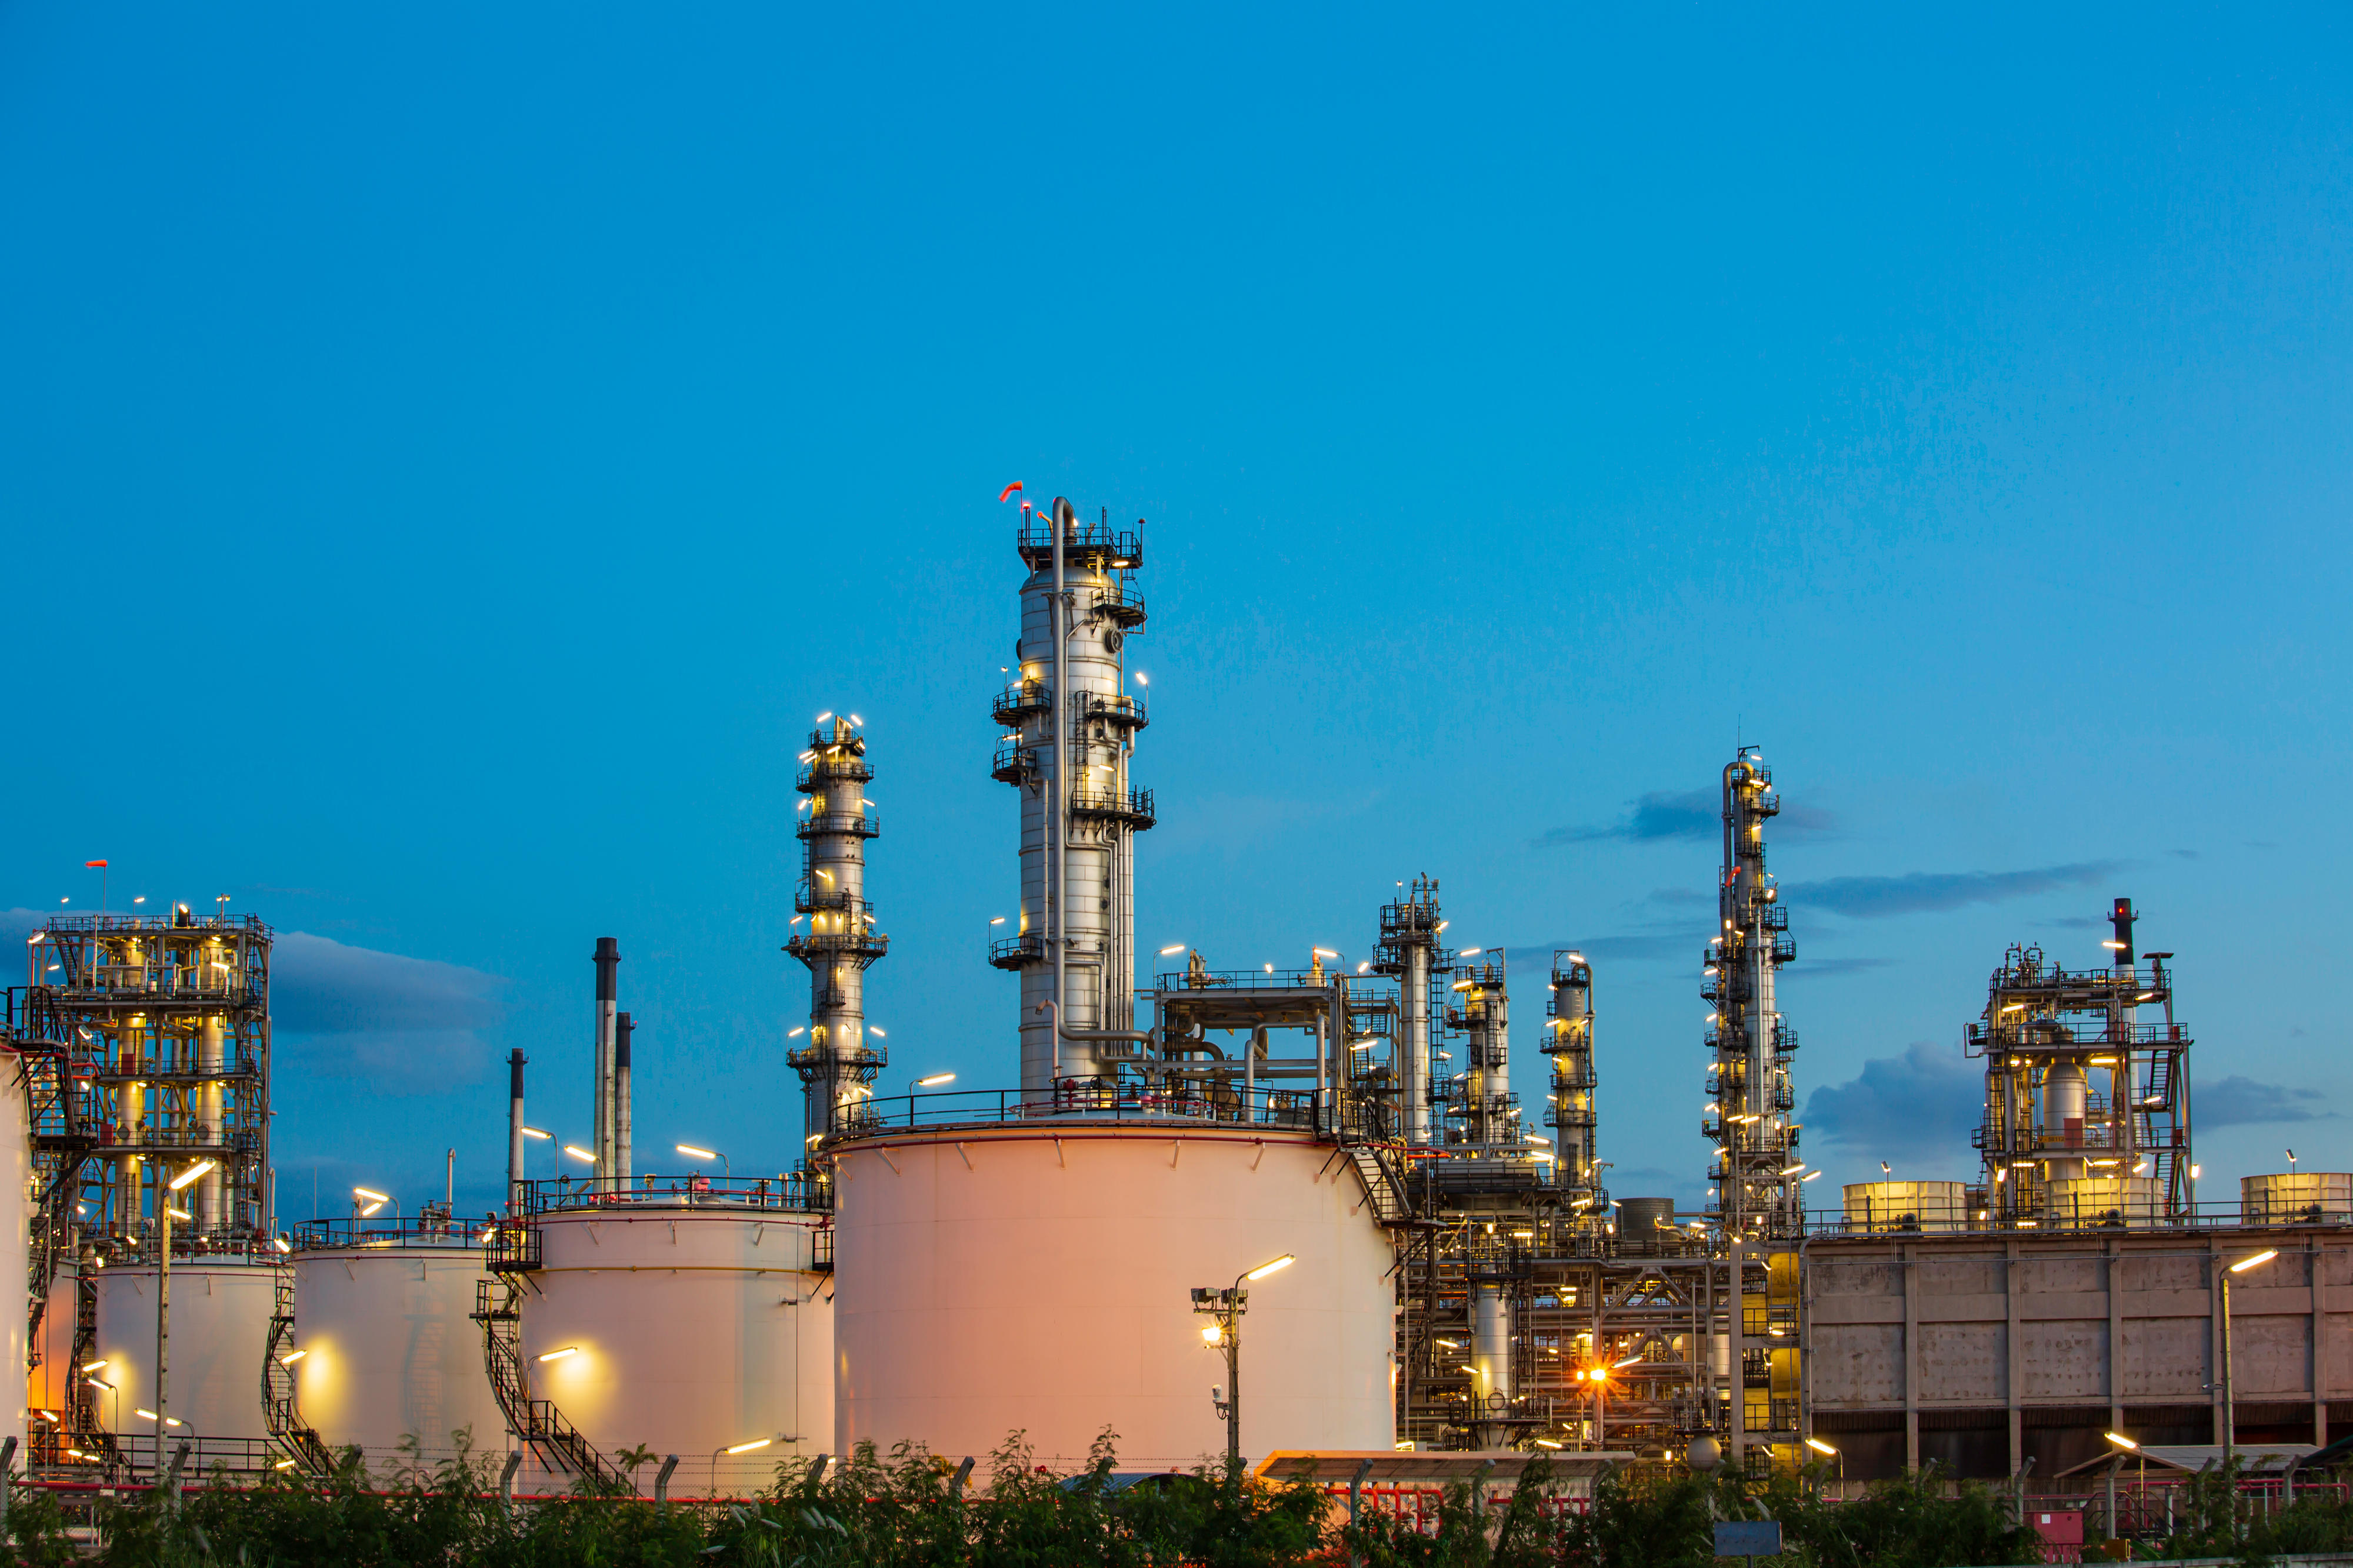 oil-refinery-plant-tower-column-petrochemistry-industry-tank-oil-gas-industrial-with-cloud-blue-sky